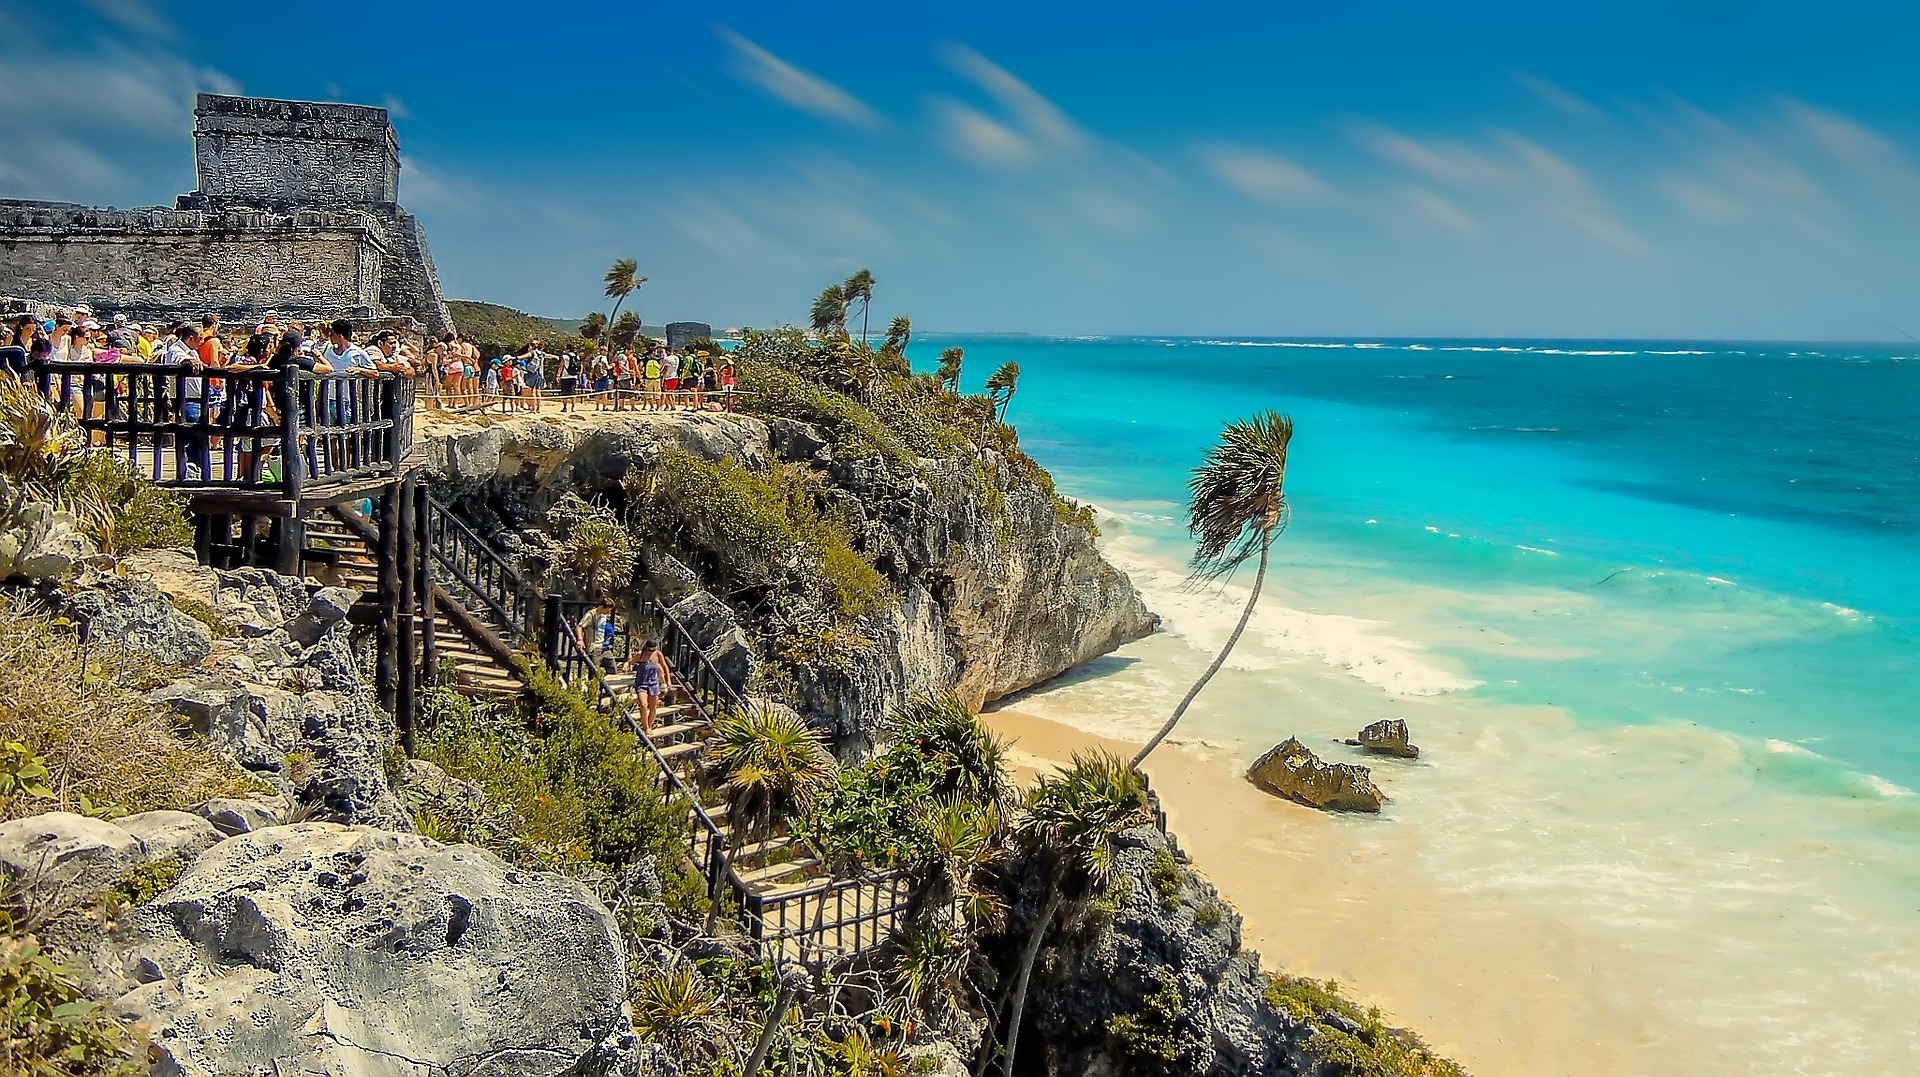 What’s the best airport to fly into to get to Tulum?